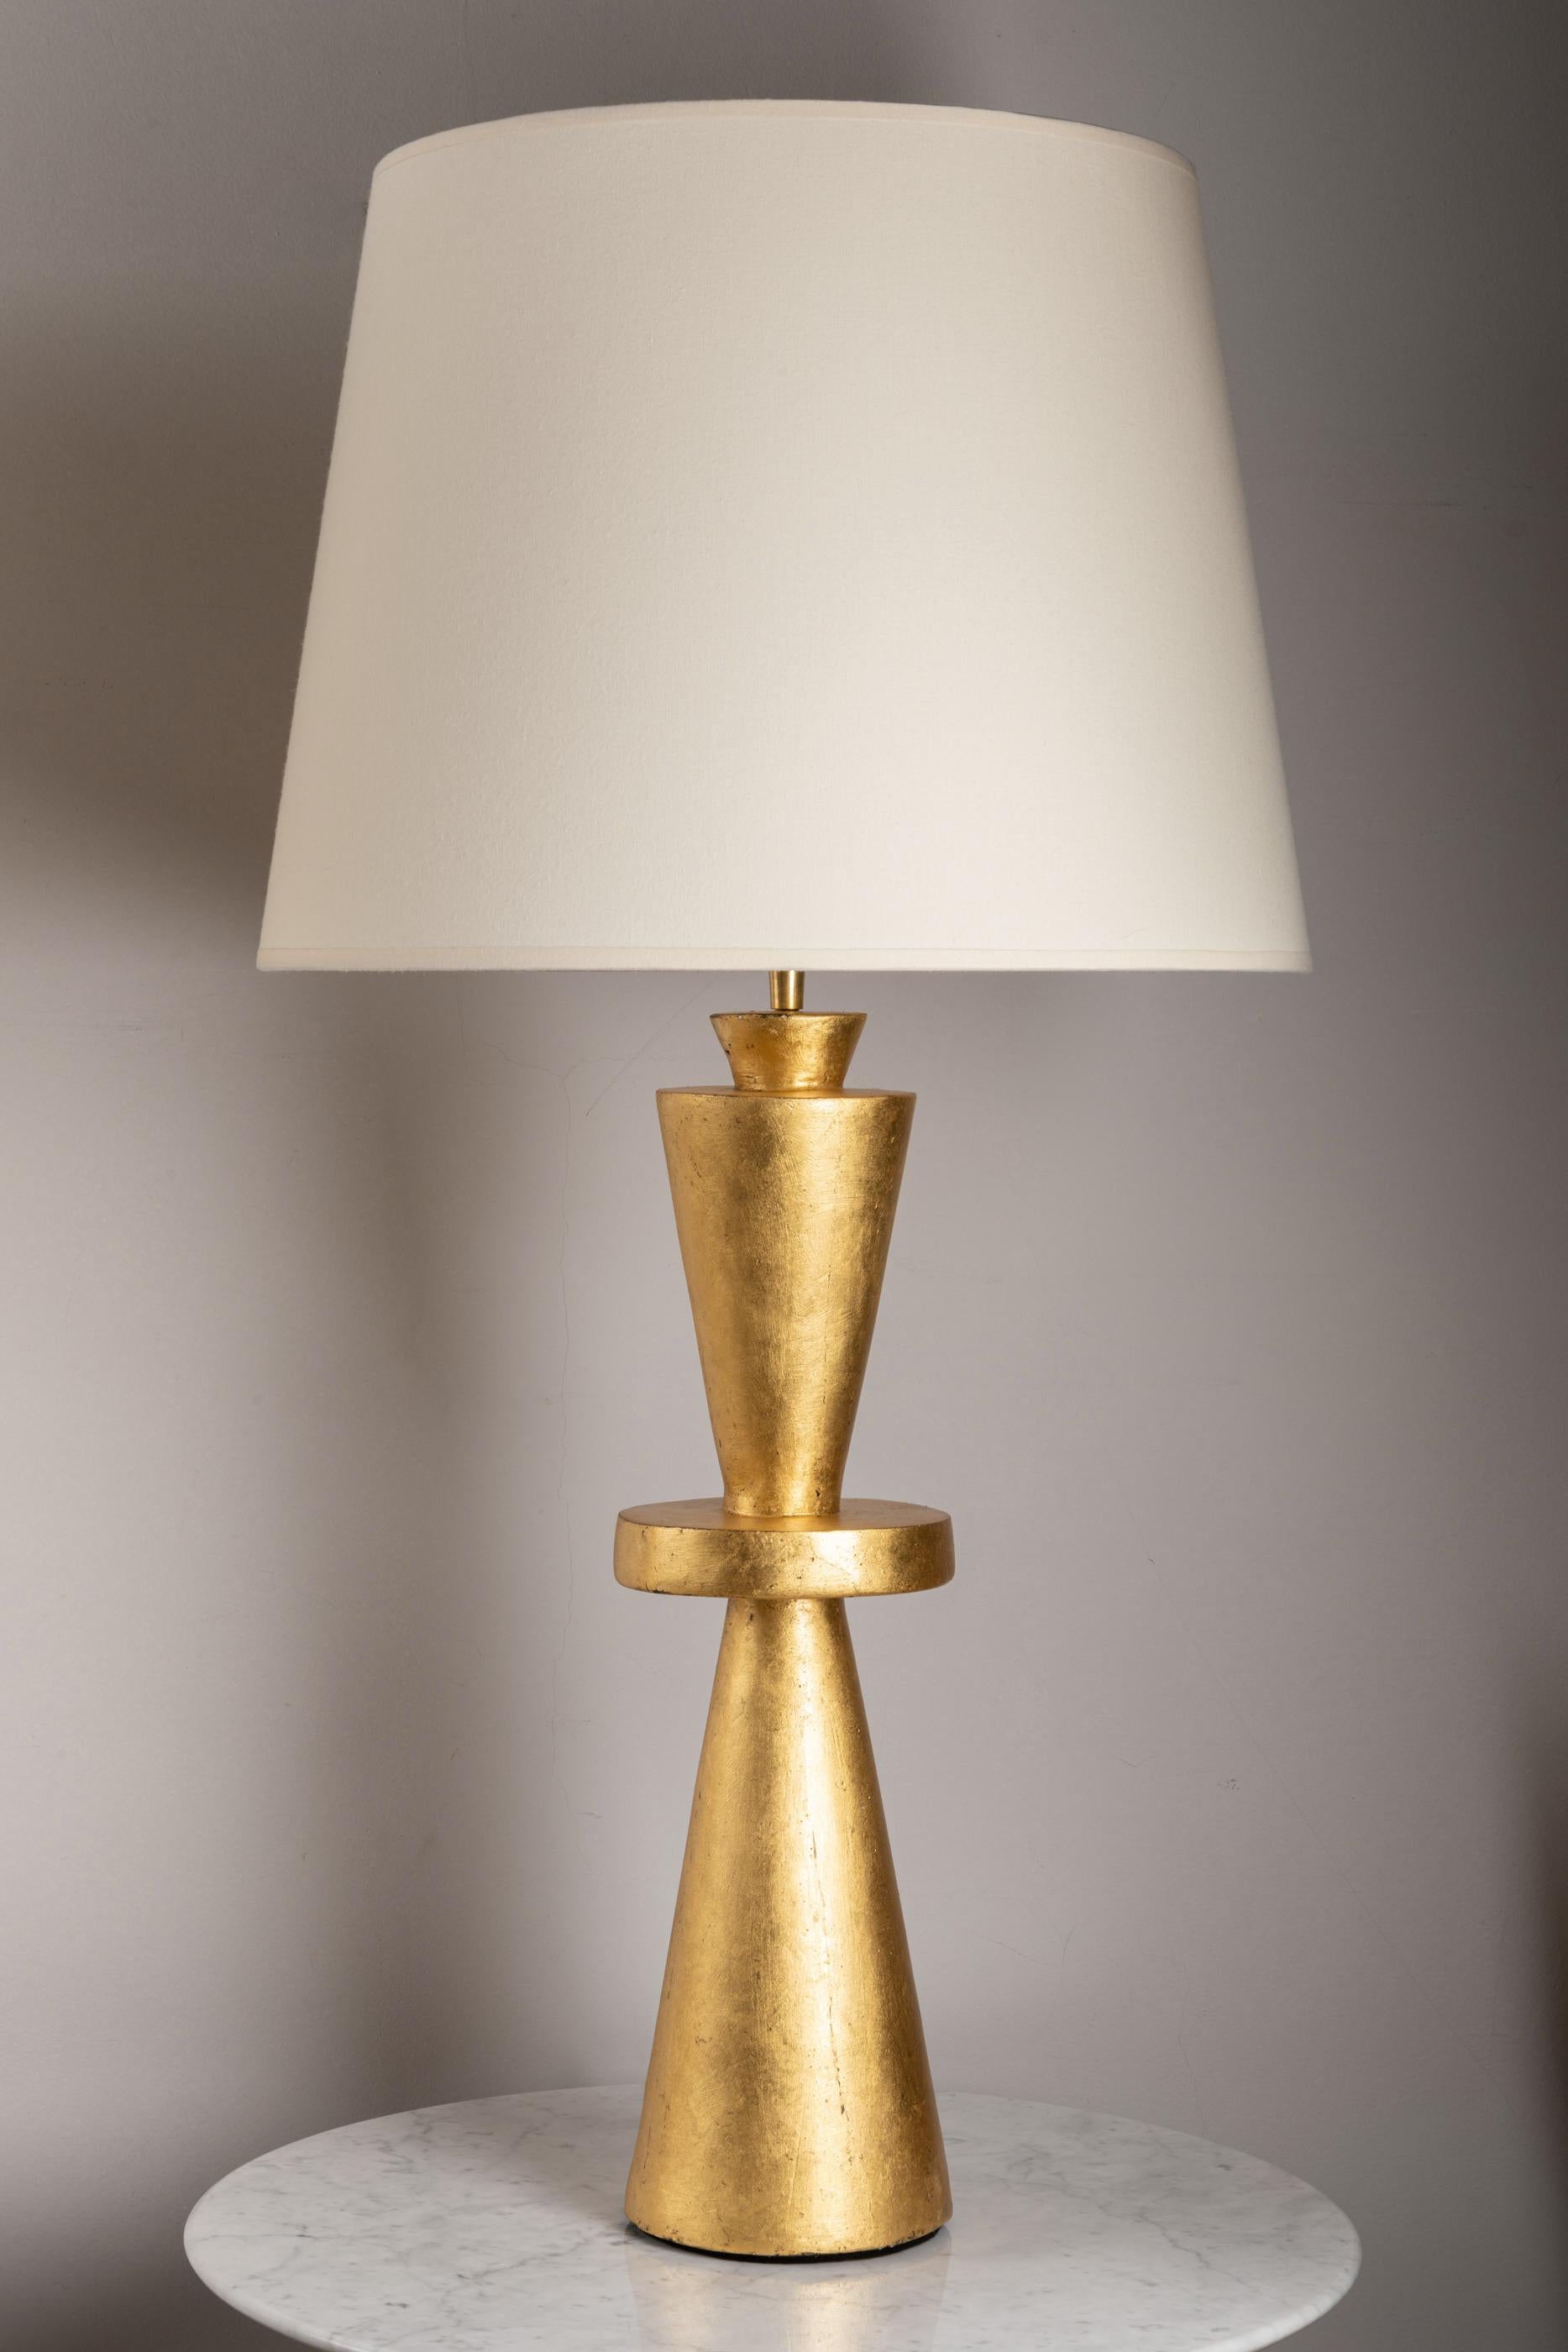 plaster table lamps